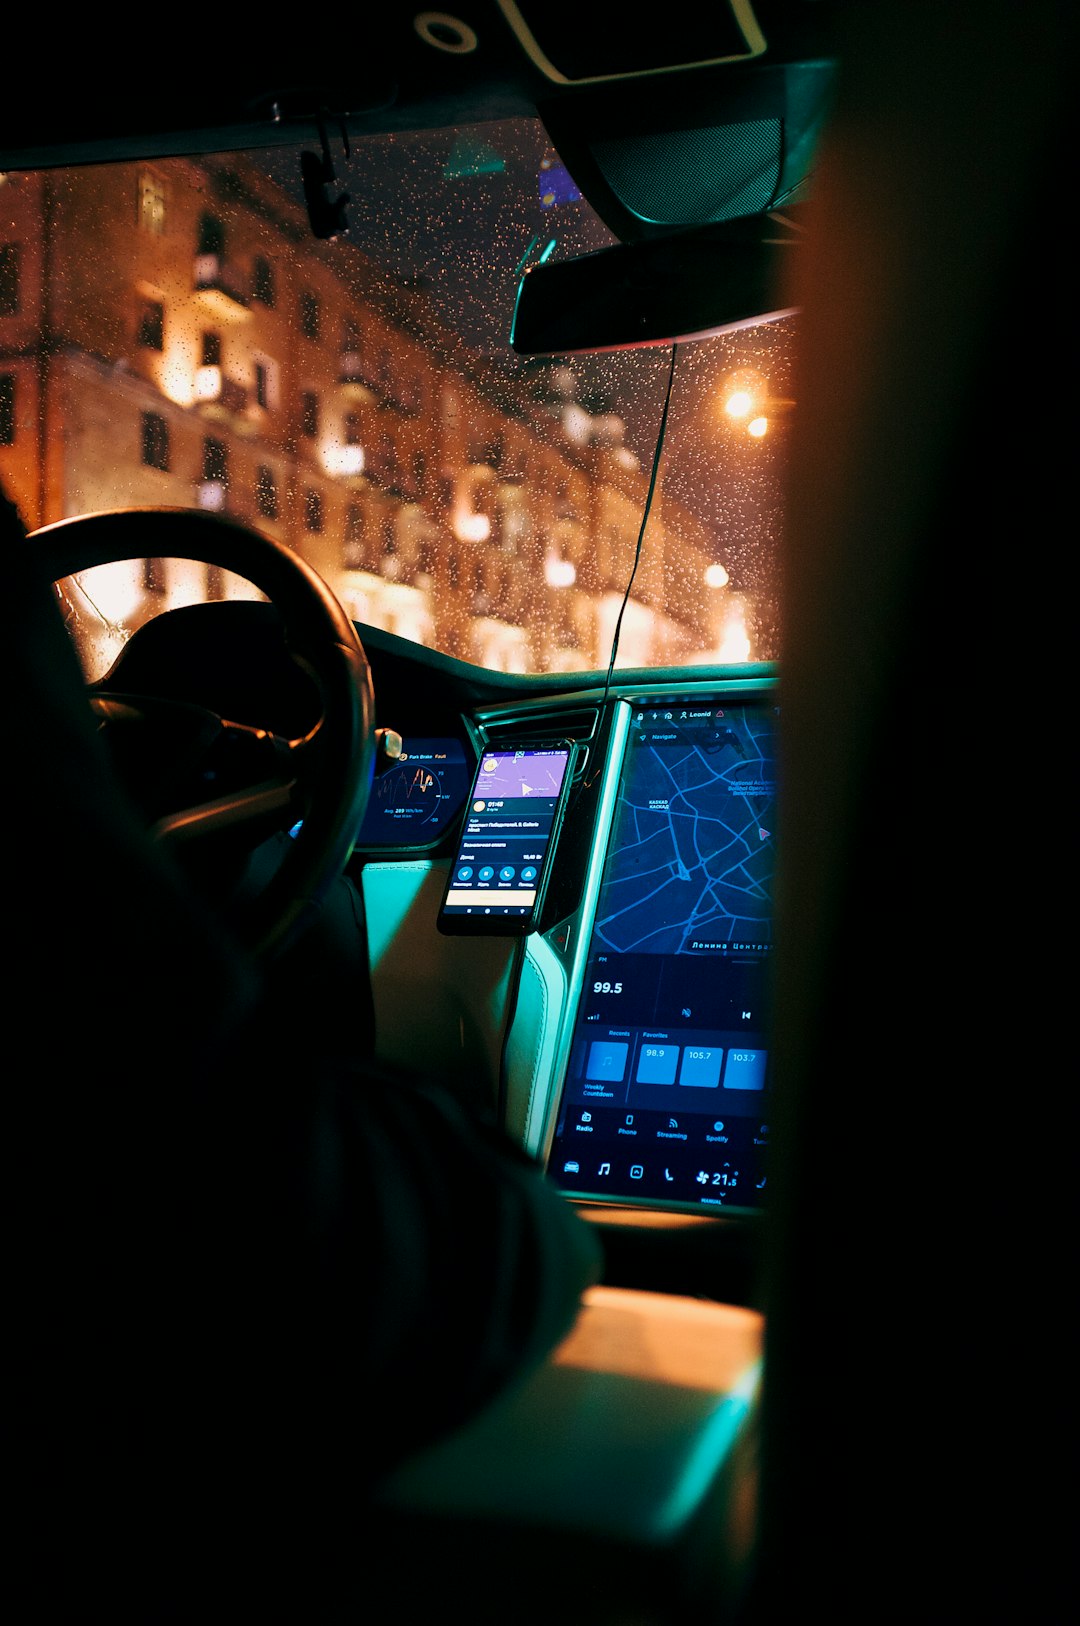 driving night with phone
